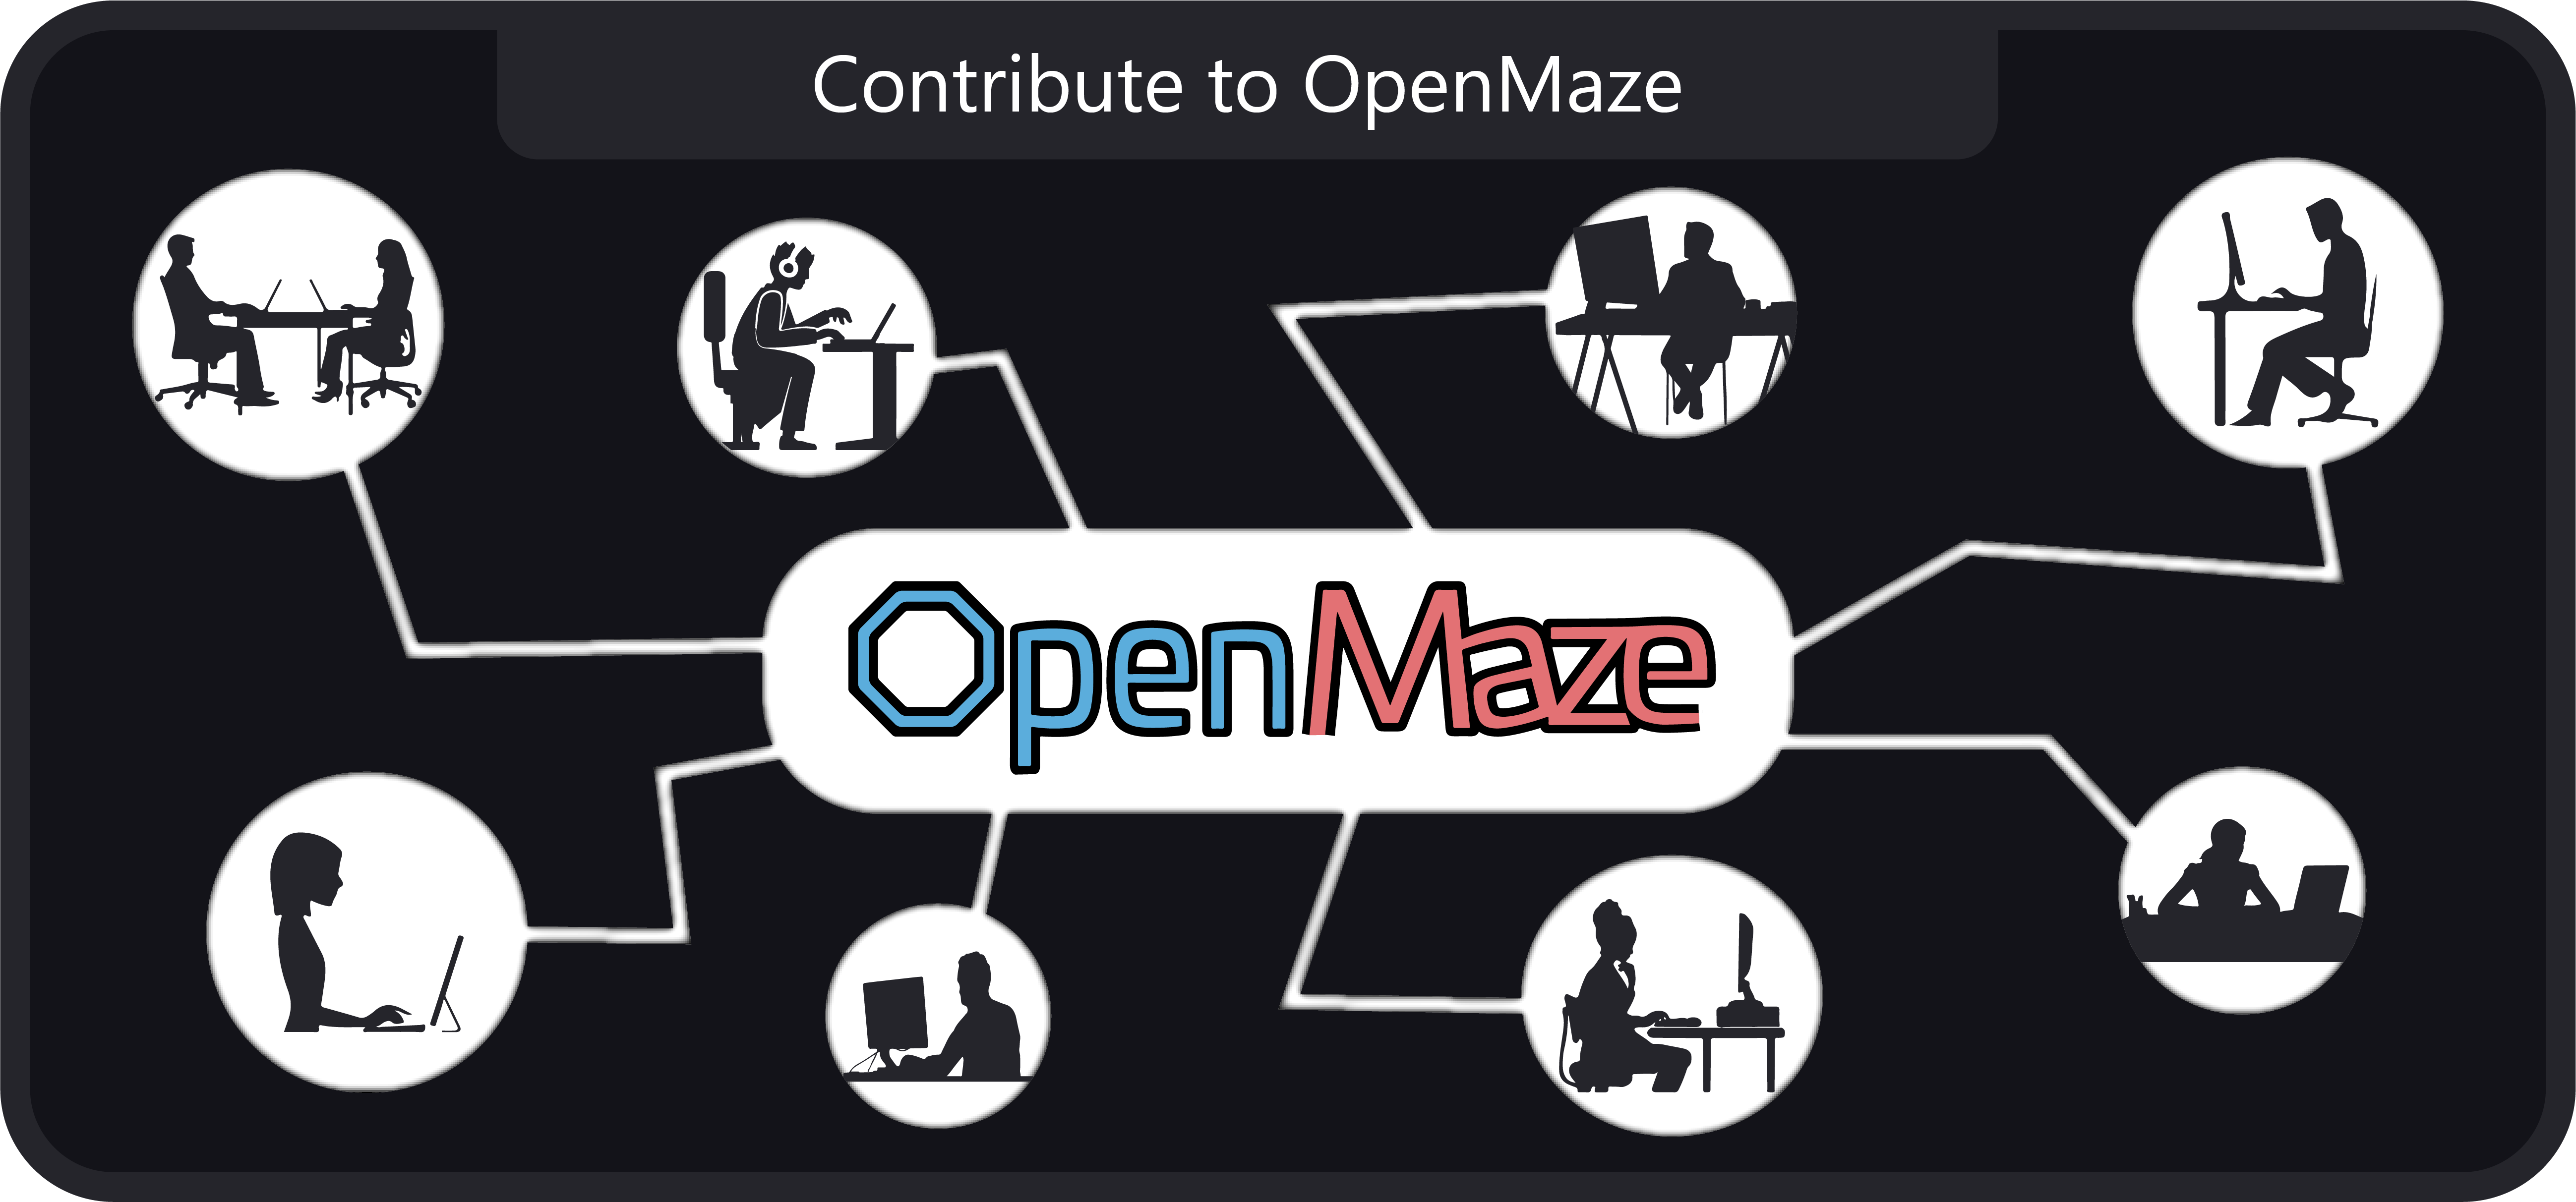 Contribute to OpenMaze